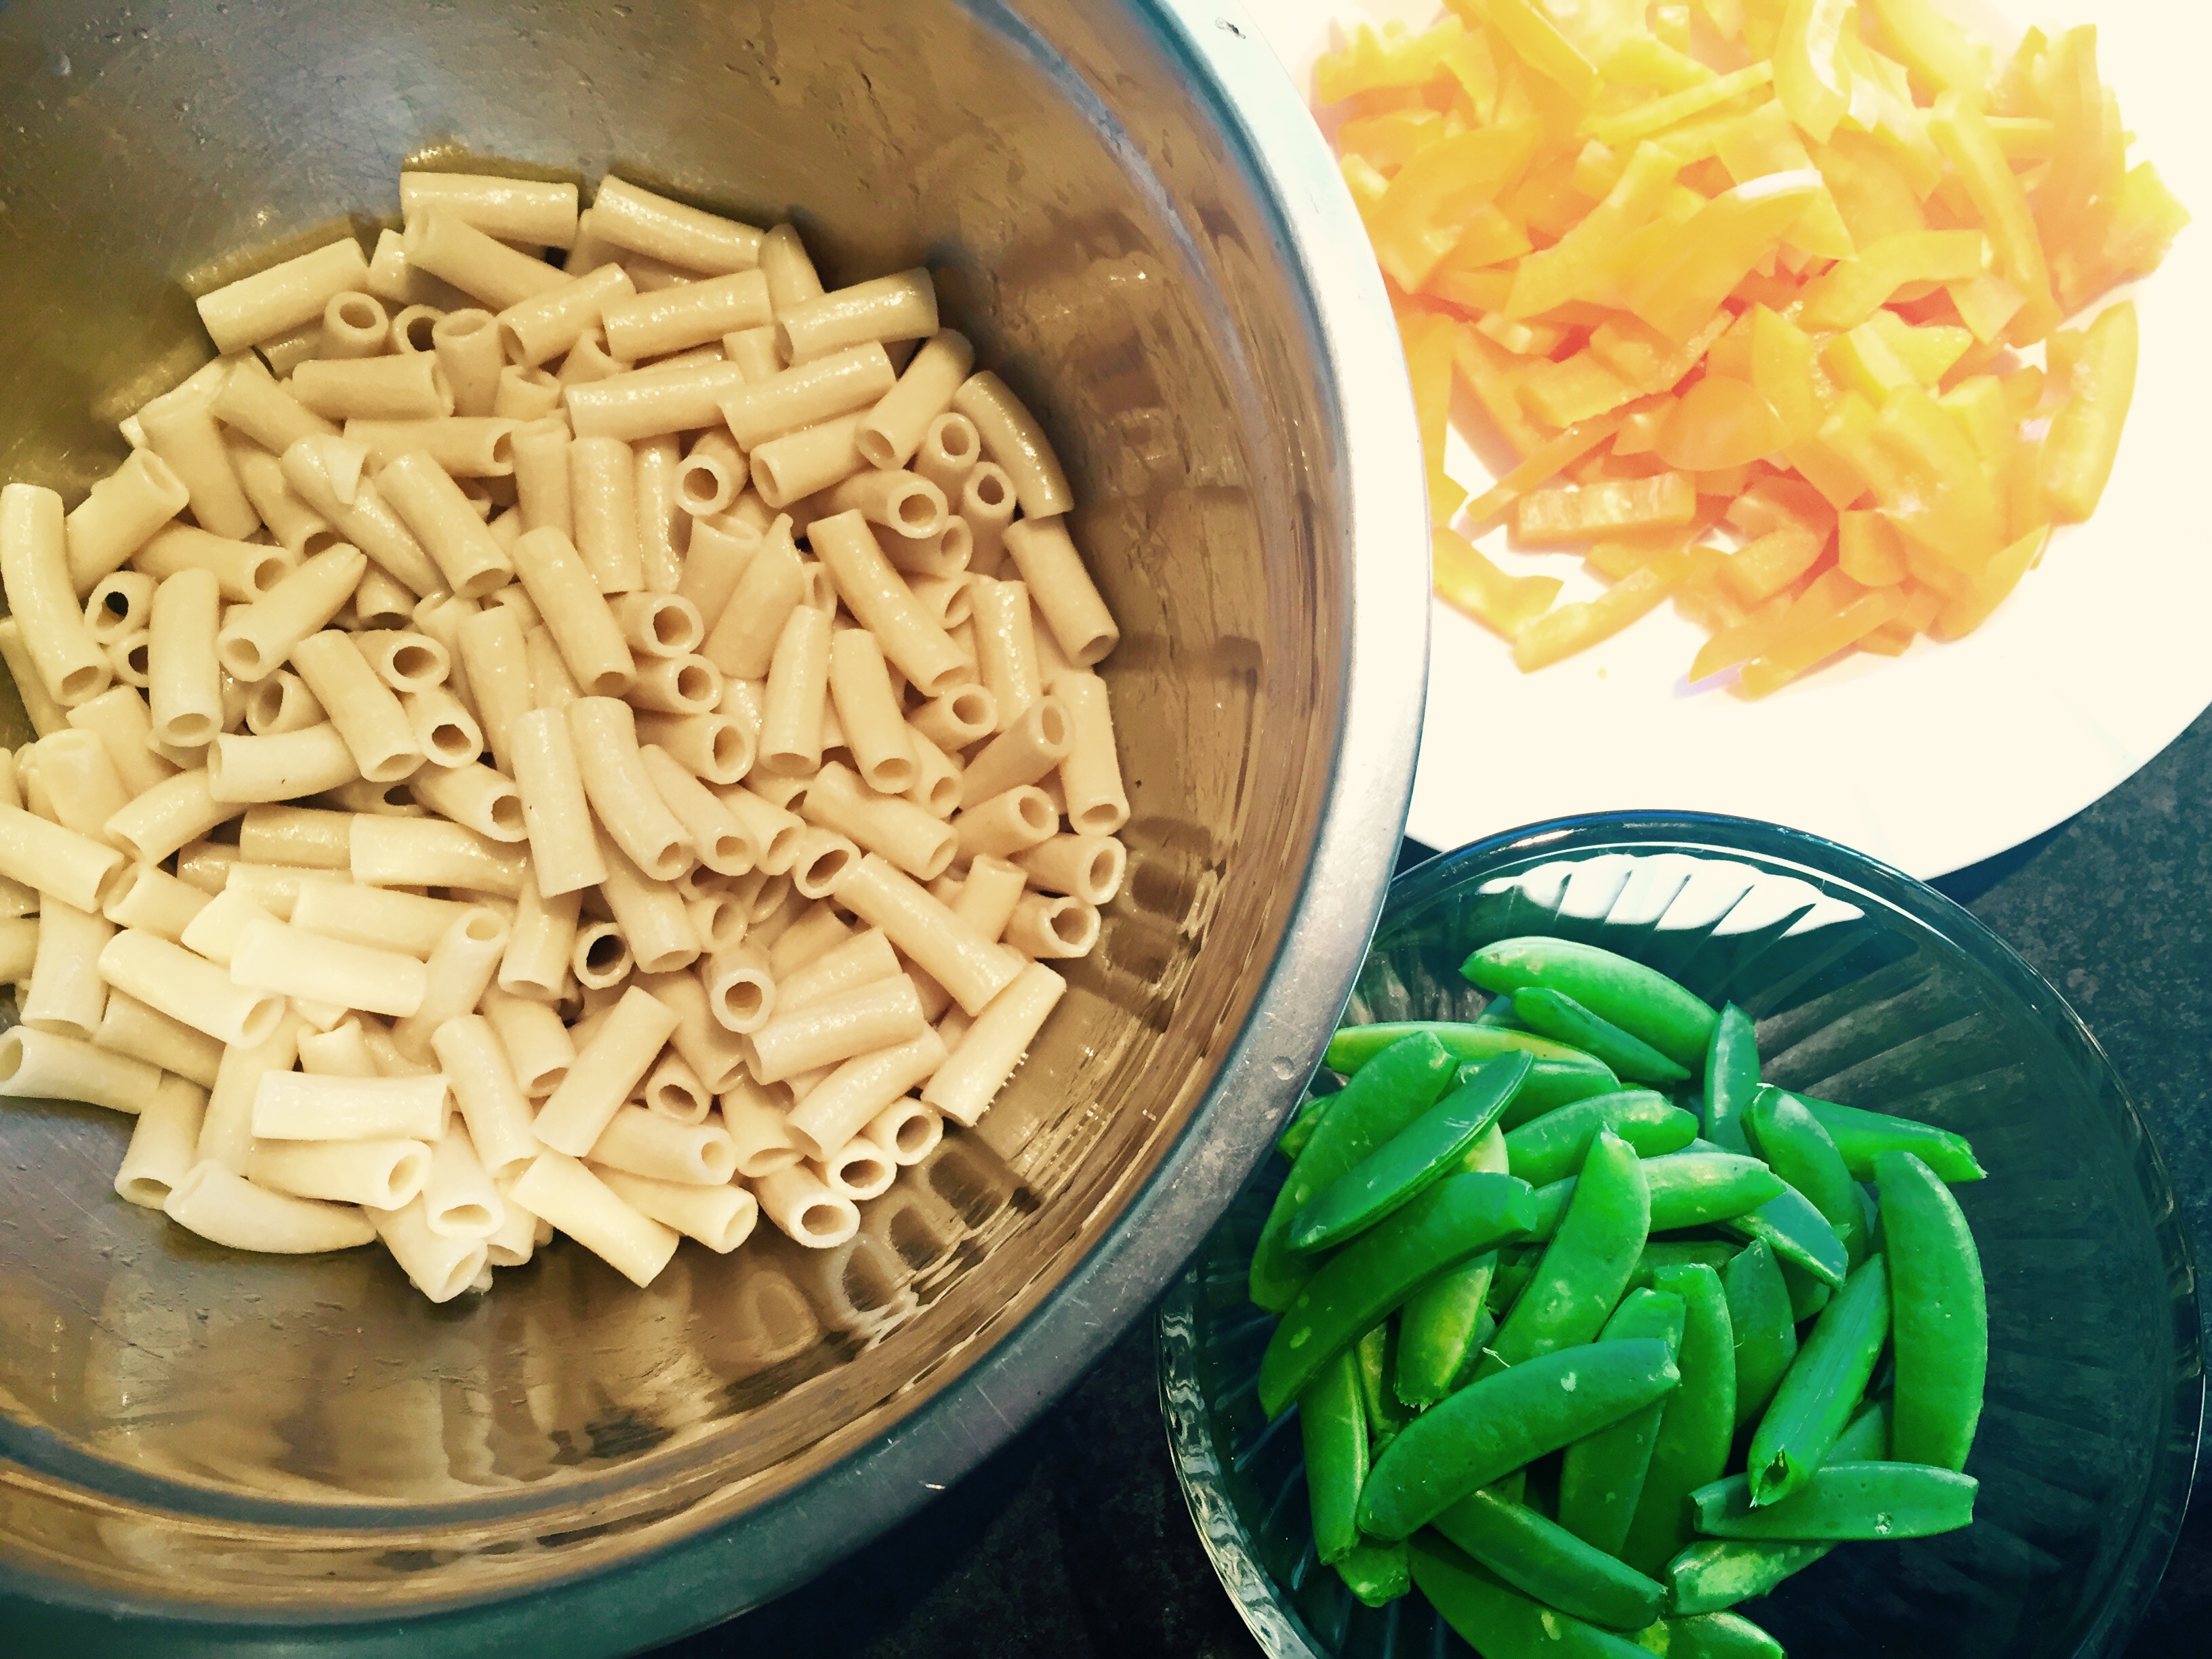 Rice flour Penne al dente with Snap Peas & Sweet Peppers waiting for some Pesto goodness